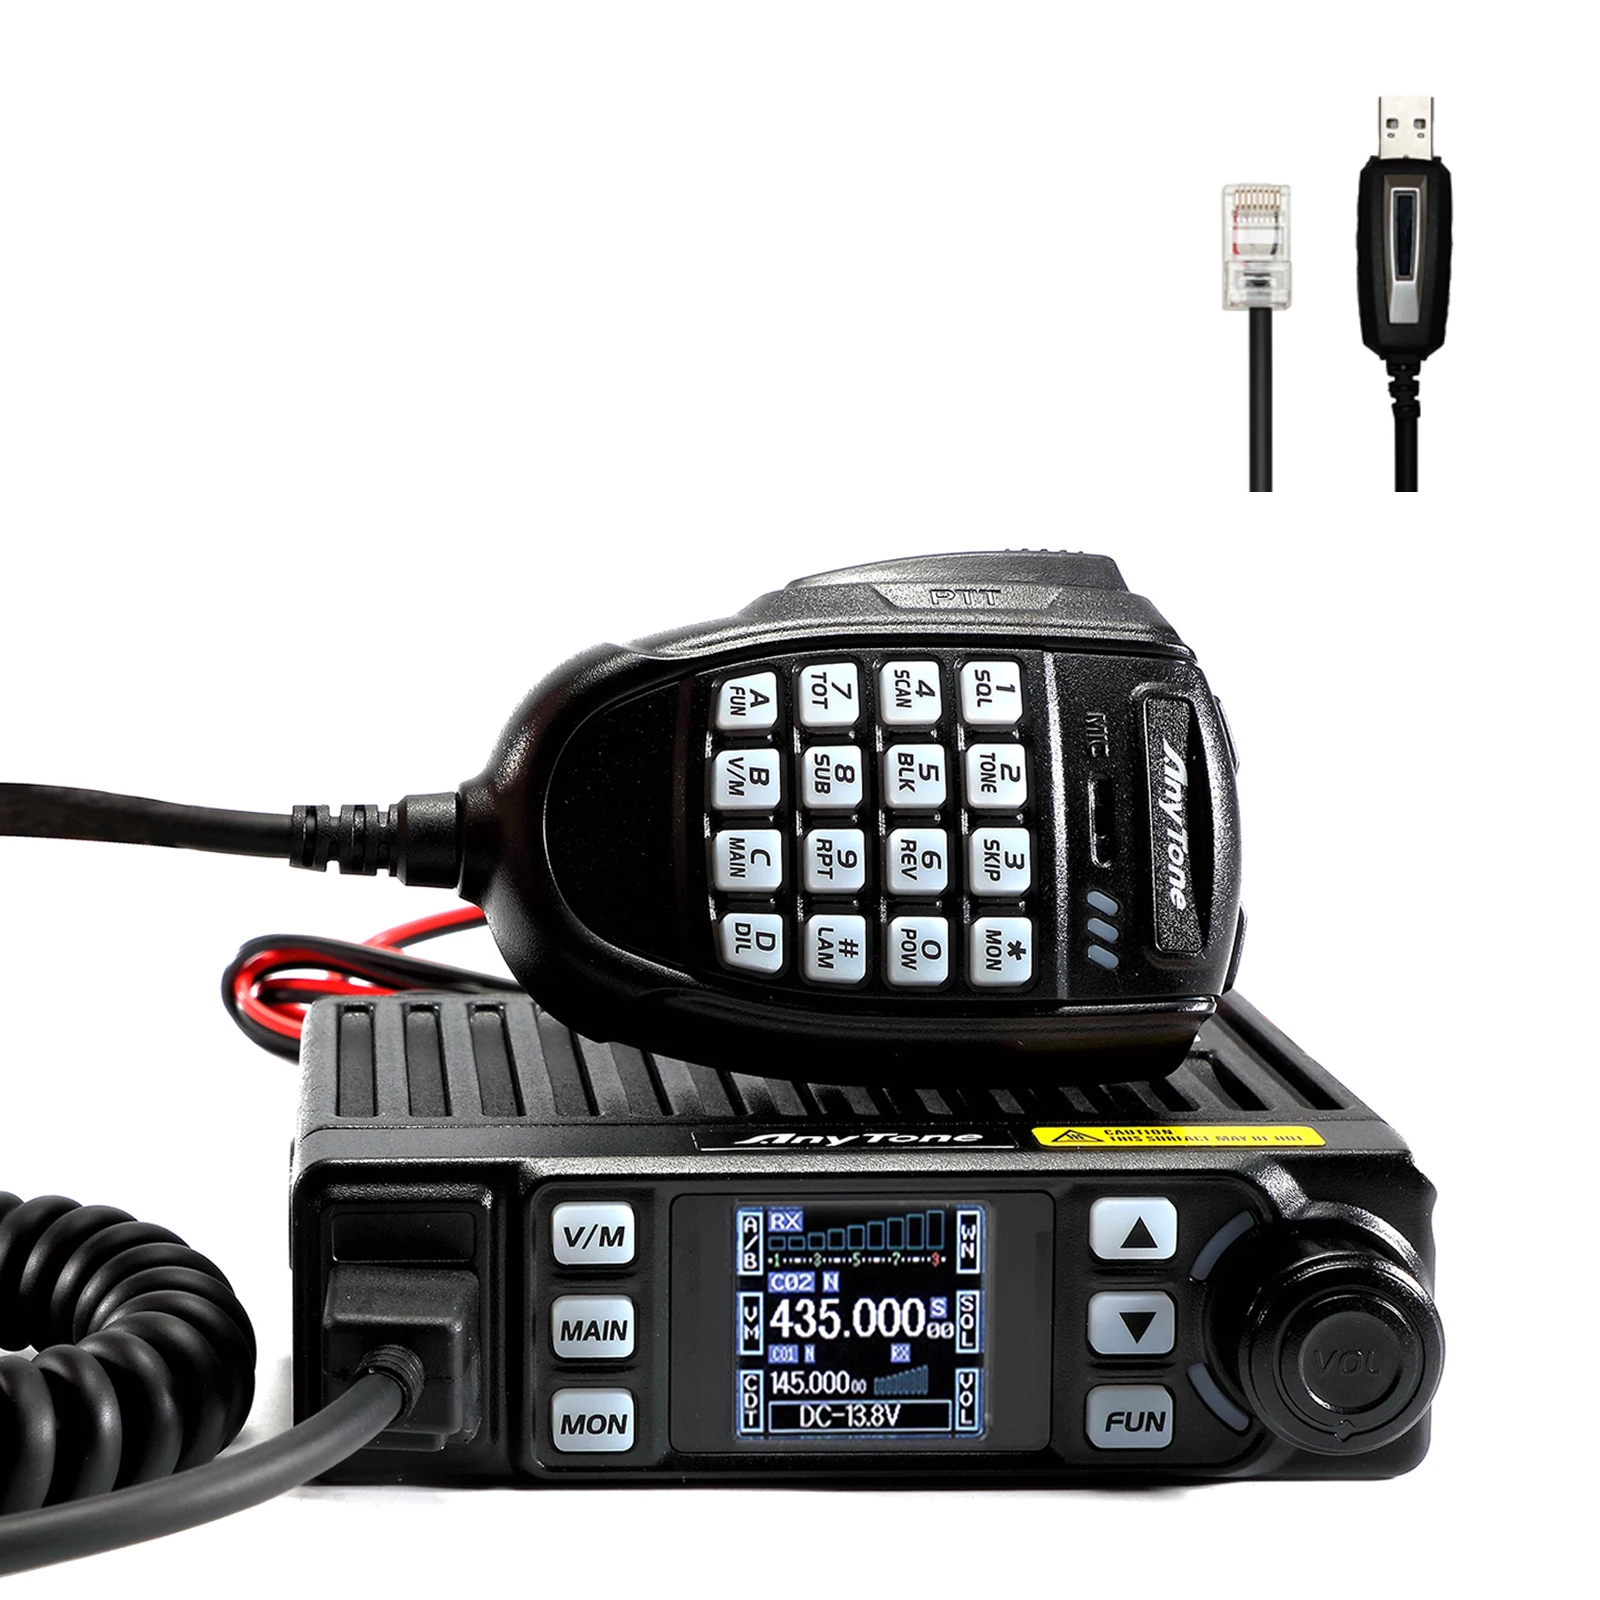 

AnyTone AT-779 UV Dual Band Radio Long Range mini Size Transceiver for Car Vehicles with Programming Cable